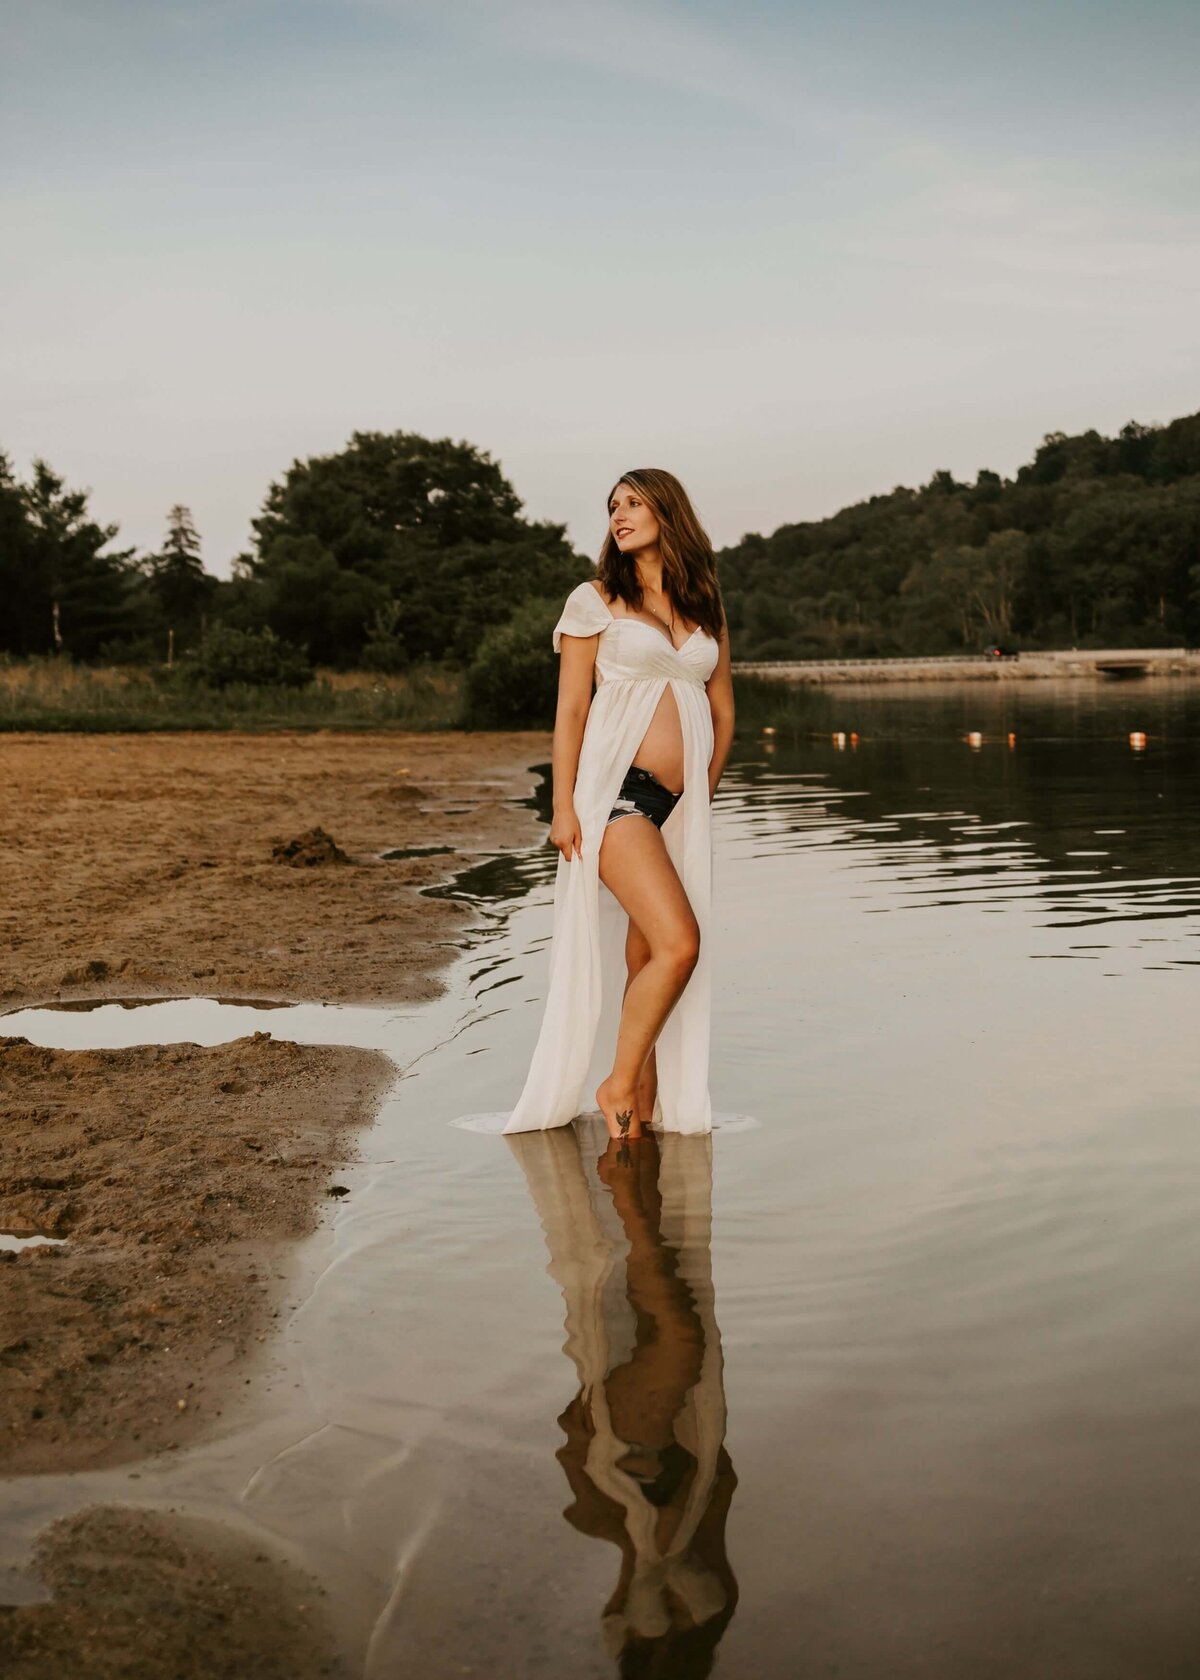 A pregnant woman standing in the water at sunset, captured by a Pittsburgh maternity photographer.